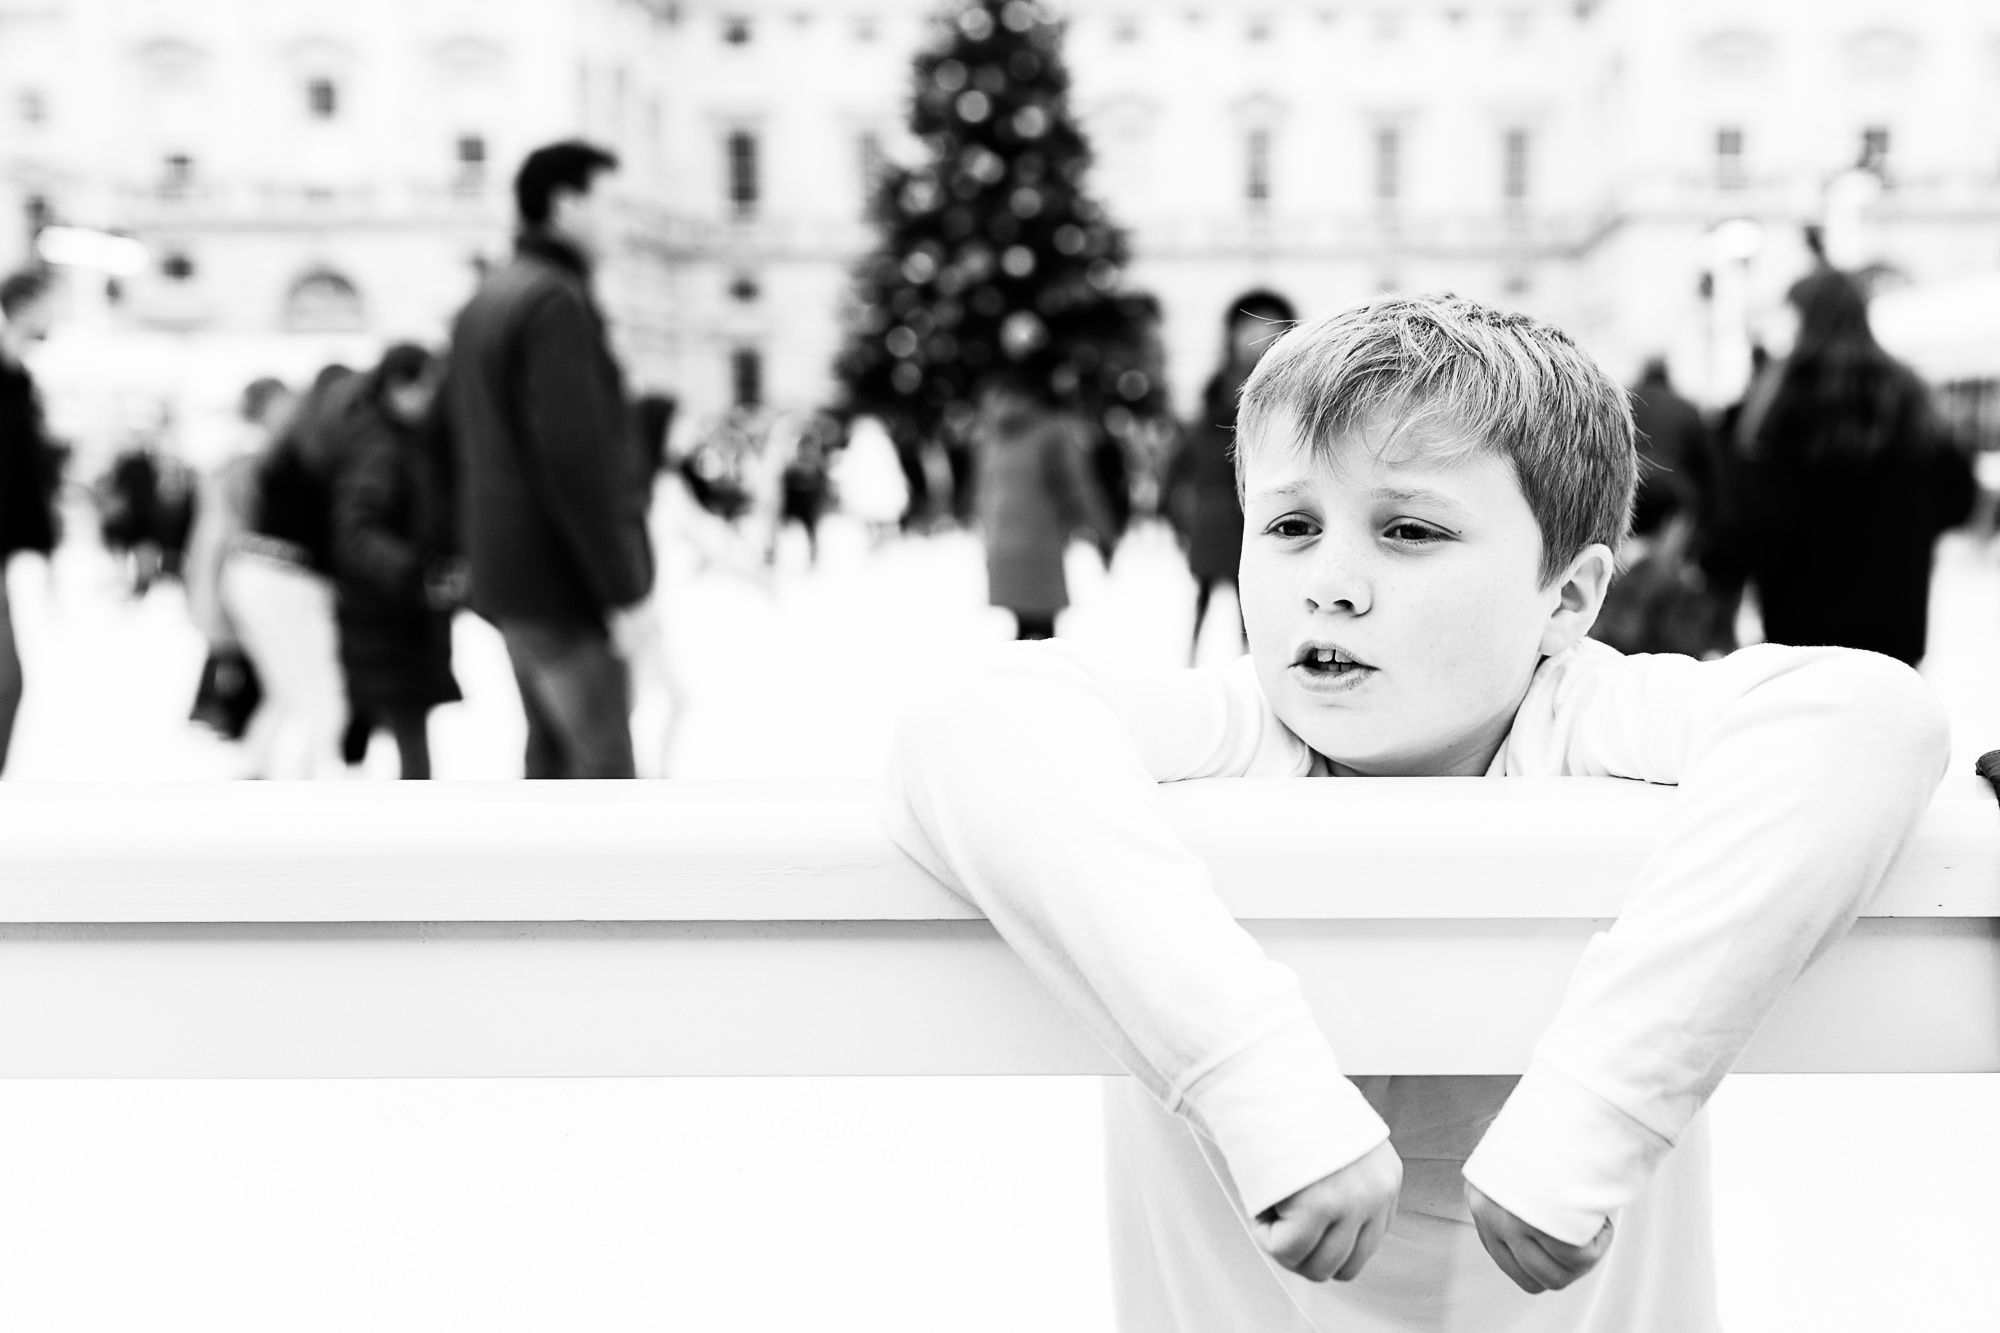 Bexley family photographer London Christmas activities review 